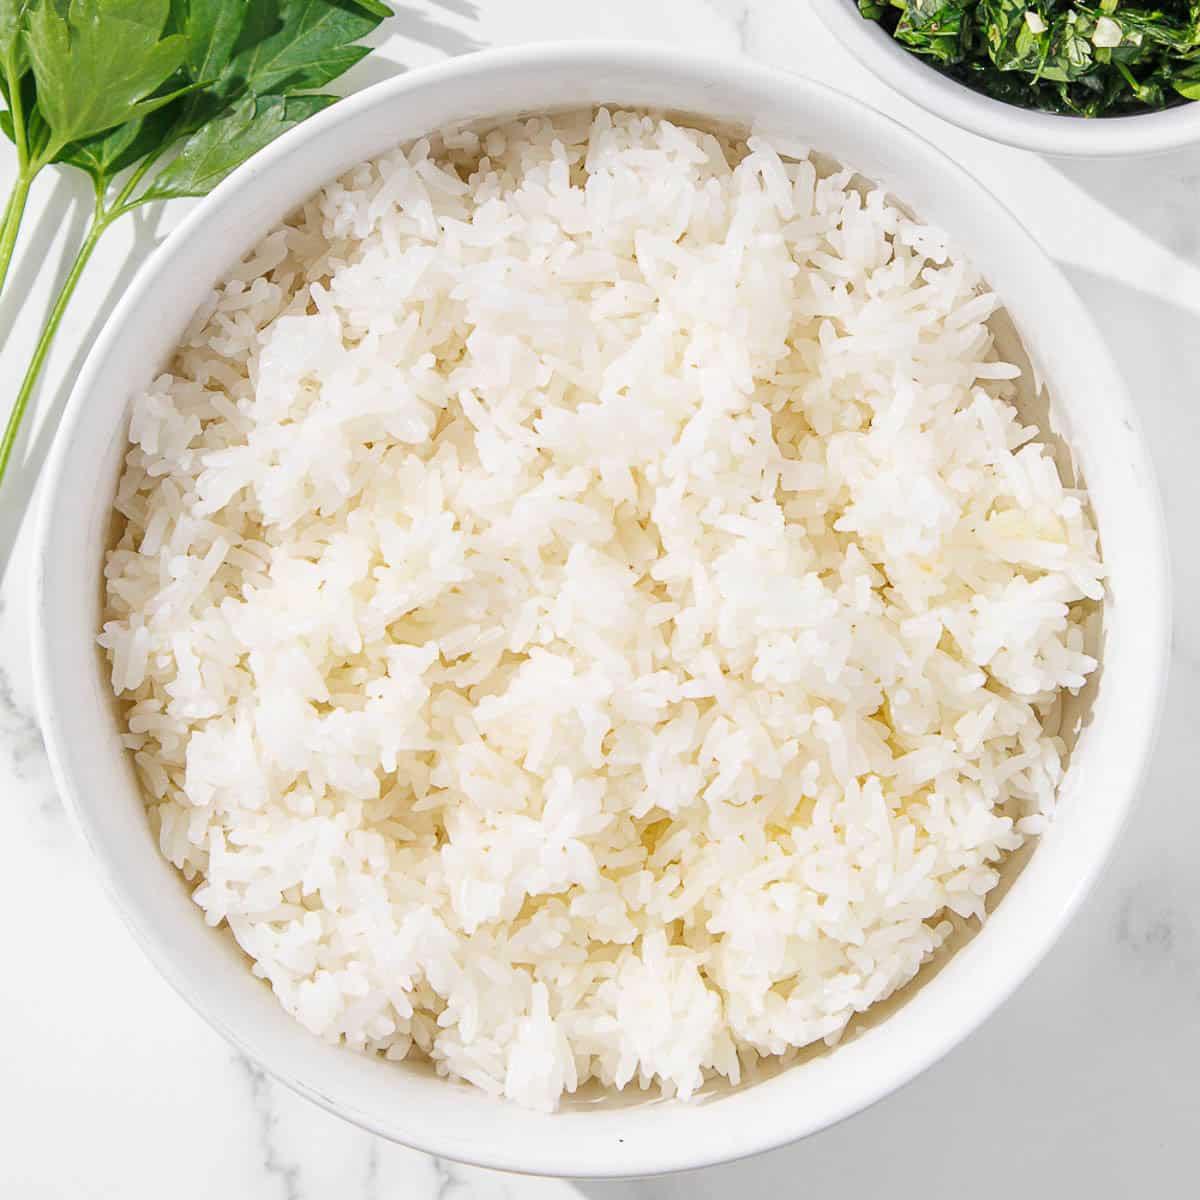 White rice in a bowl next to a bowl of parsley.